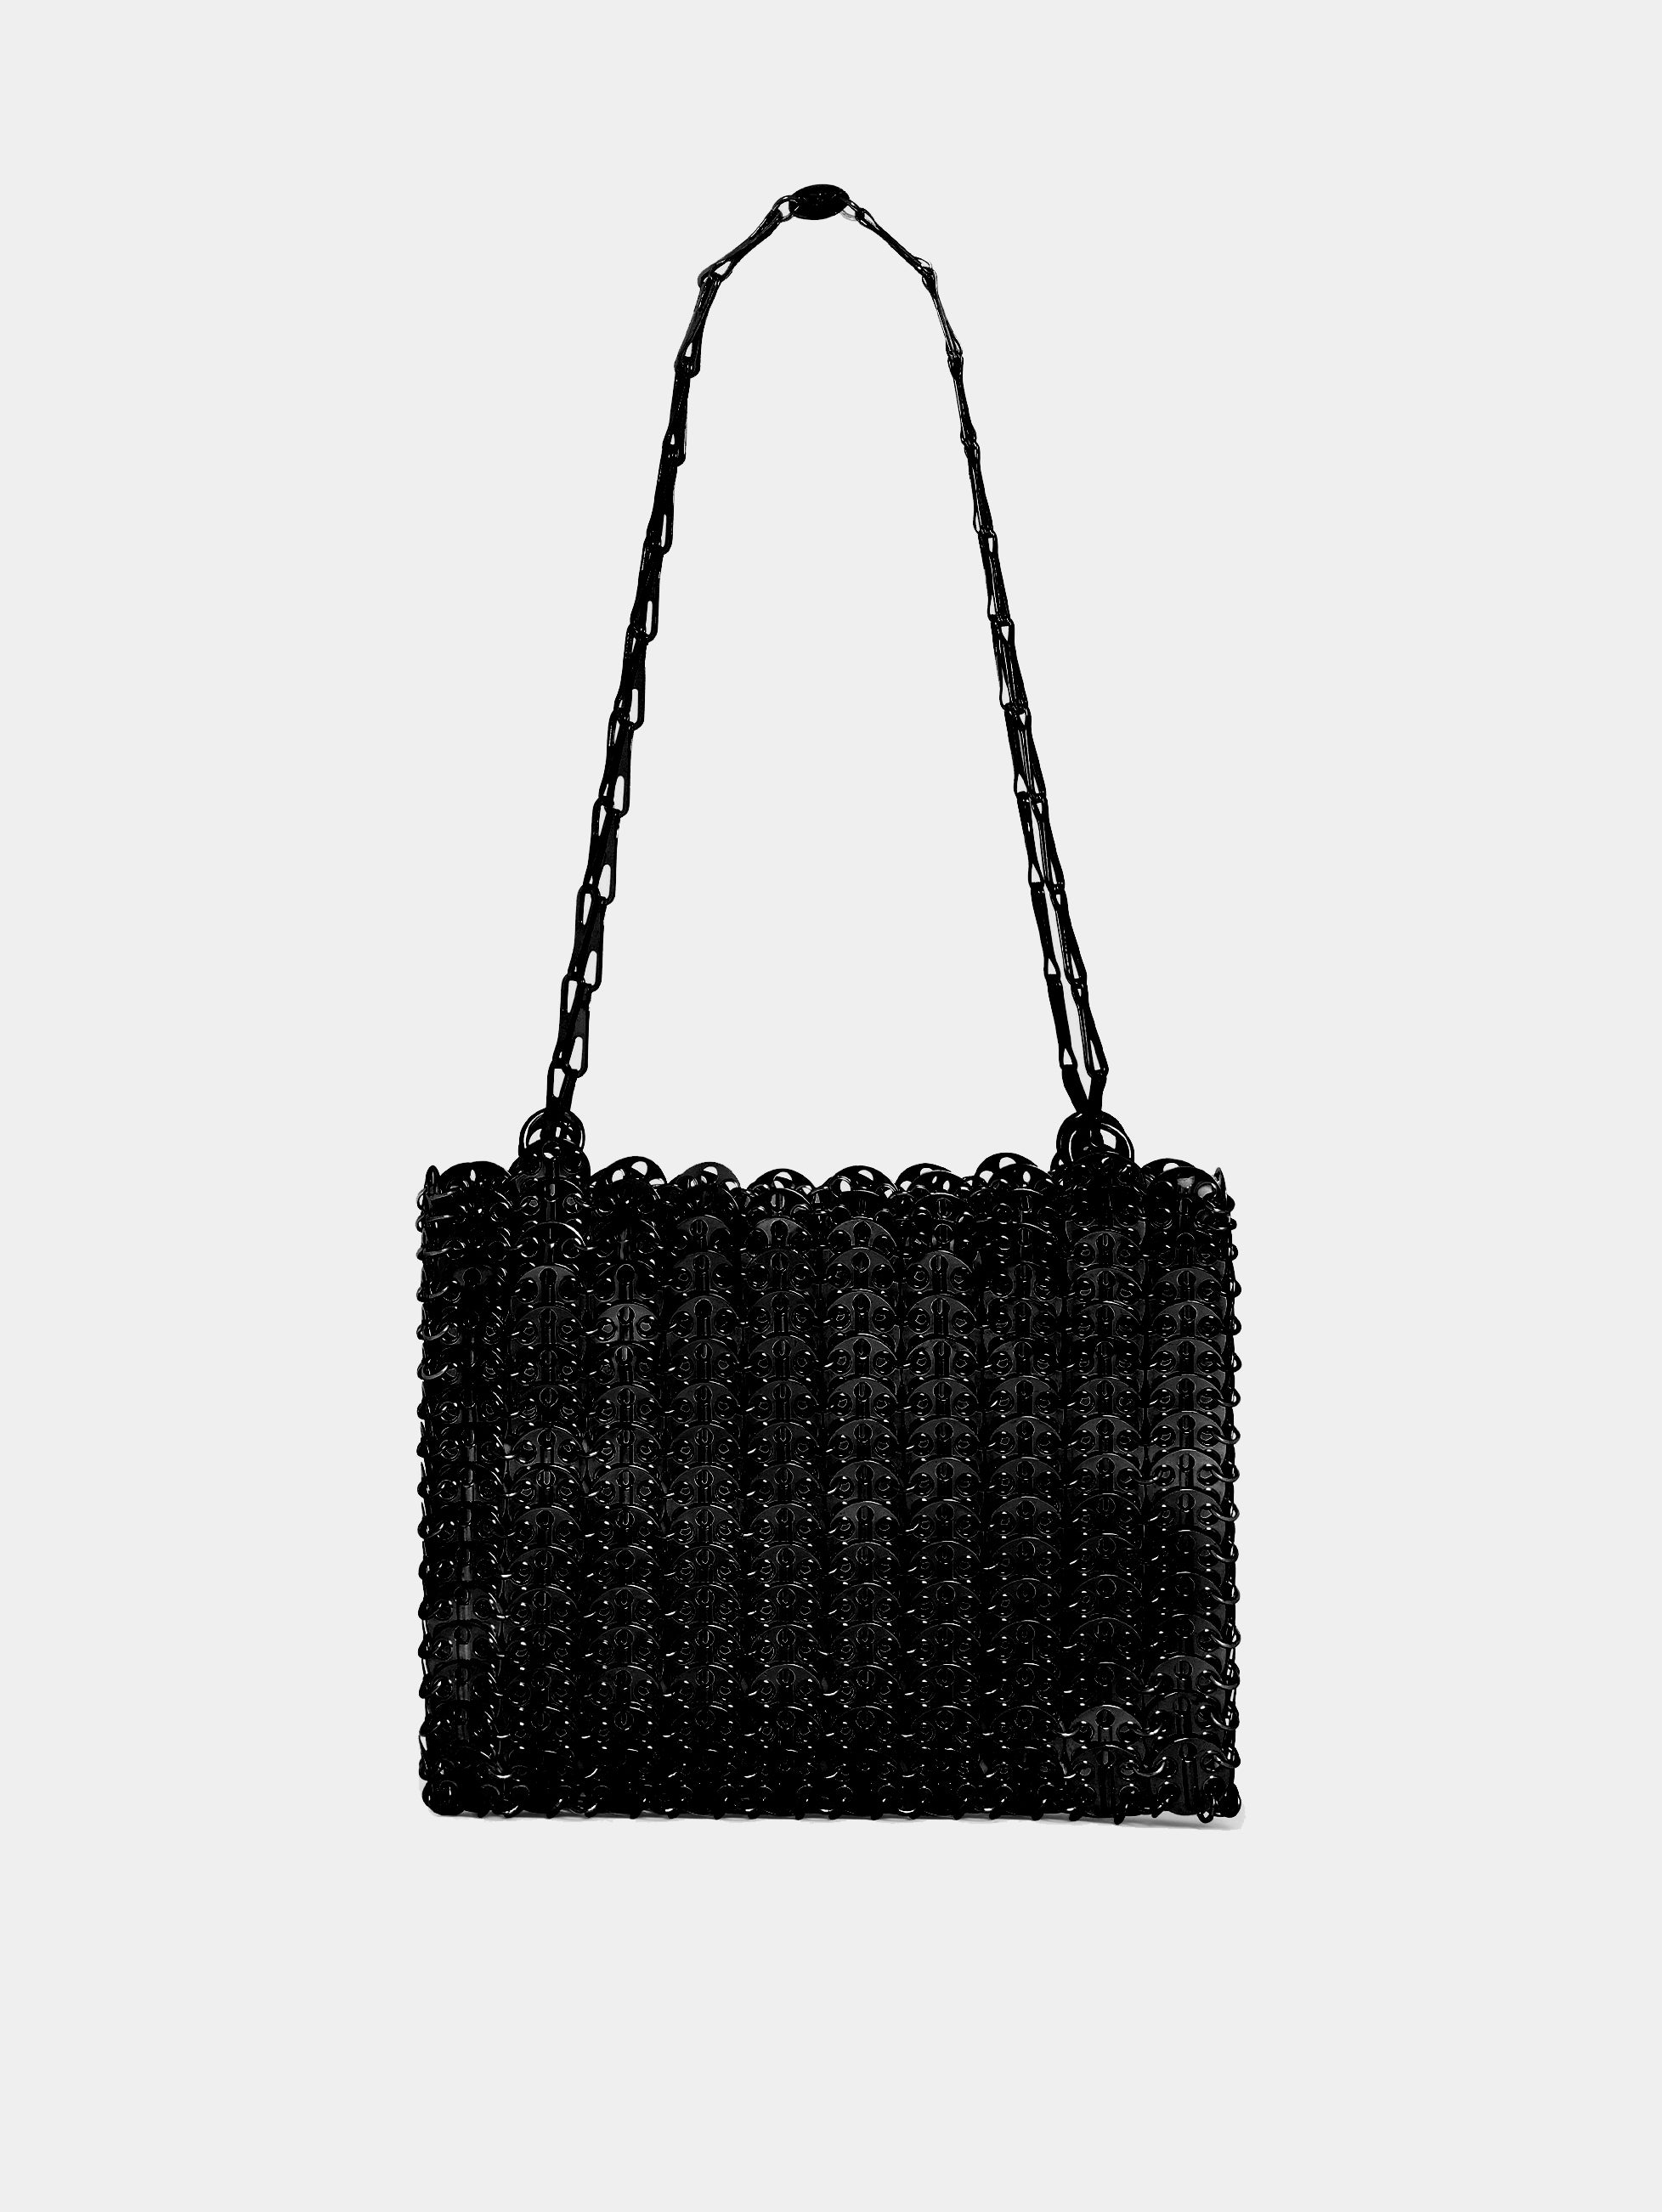 ALL BAGS FOR WOMEN | RABANNE